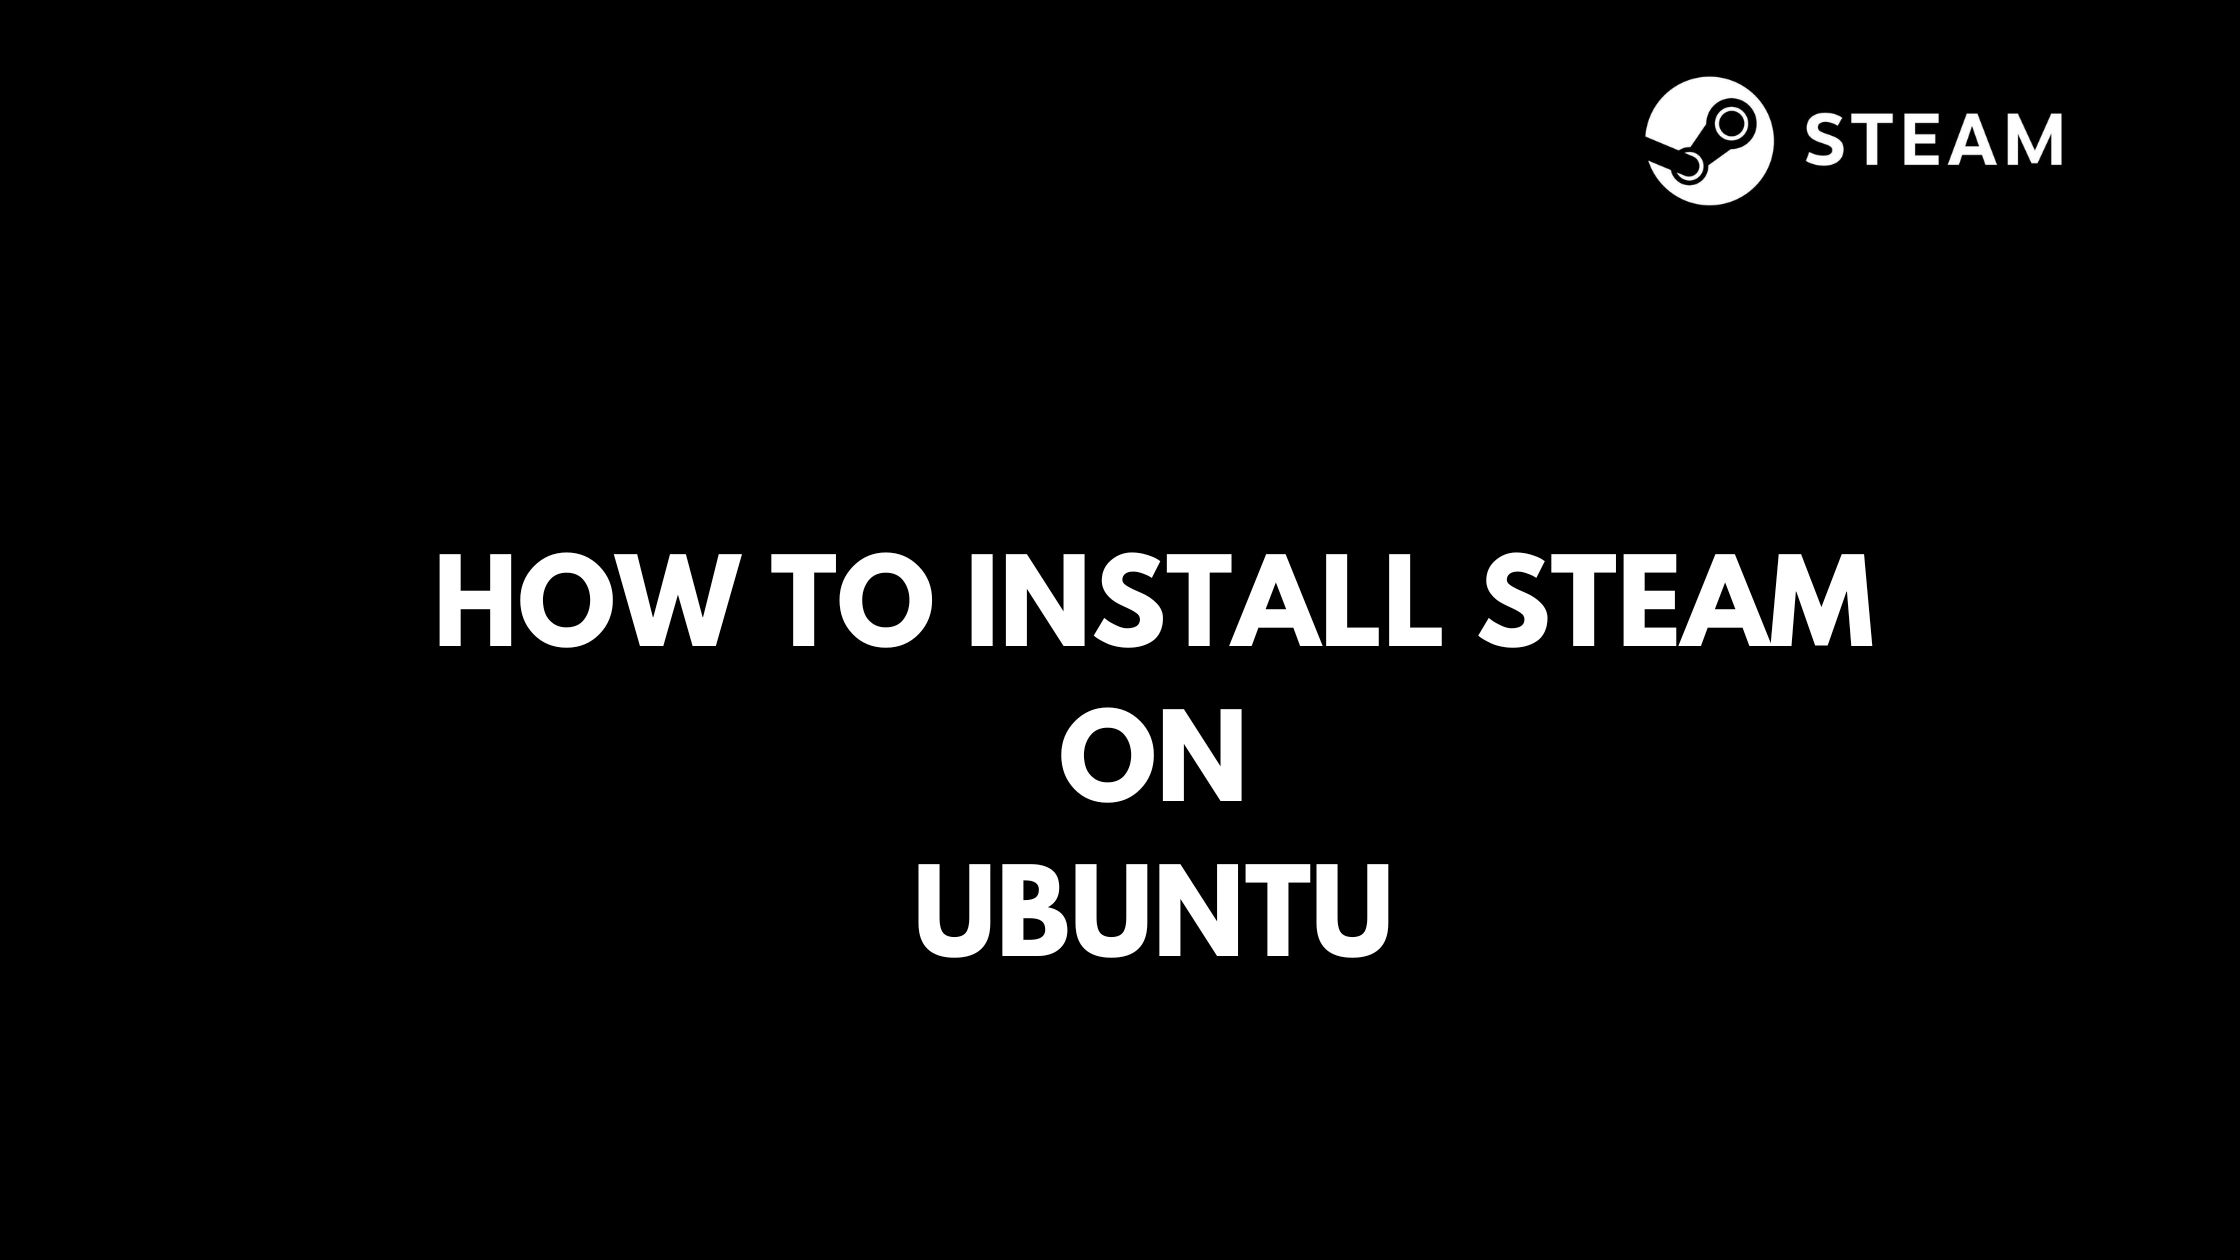 How To Install Steam On Ubuntu 22.04 or 20.04